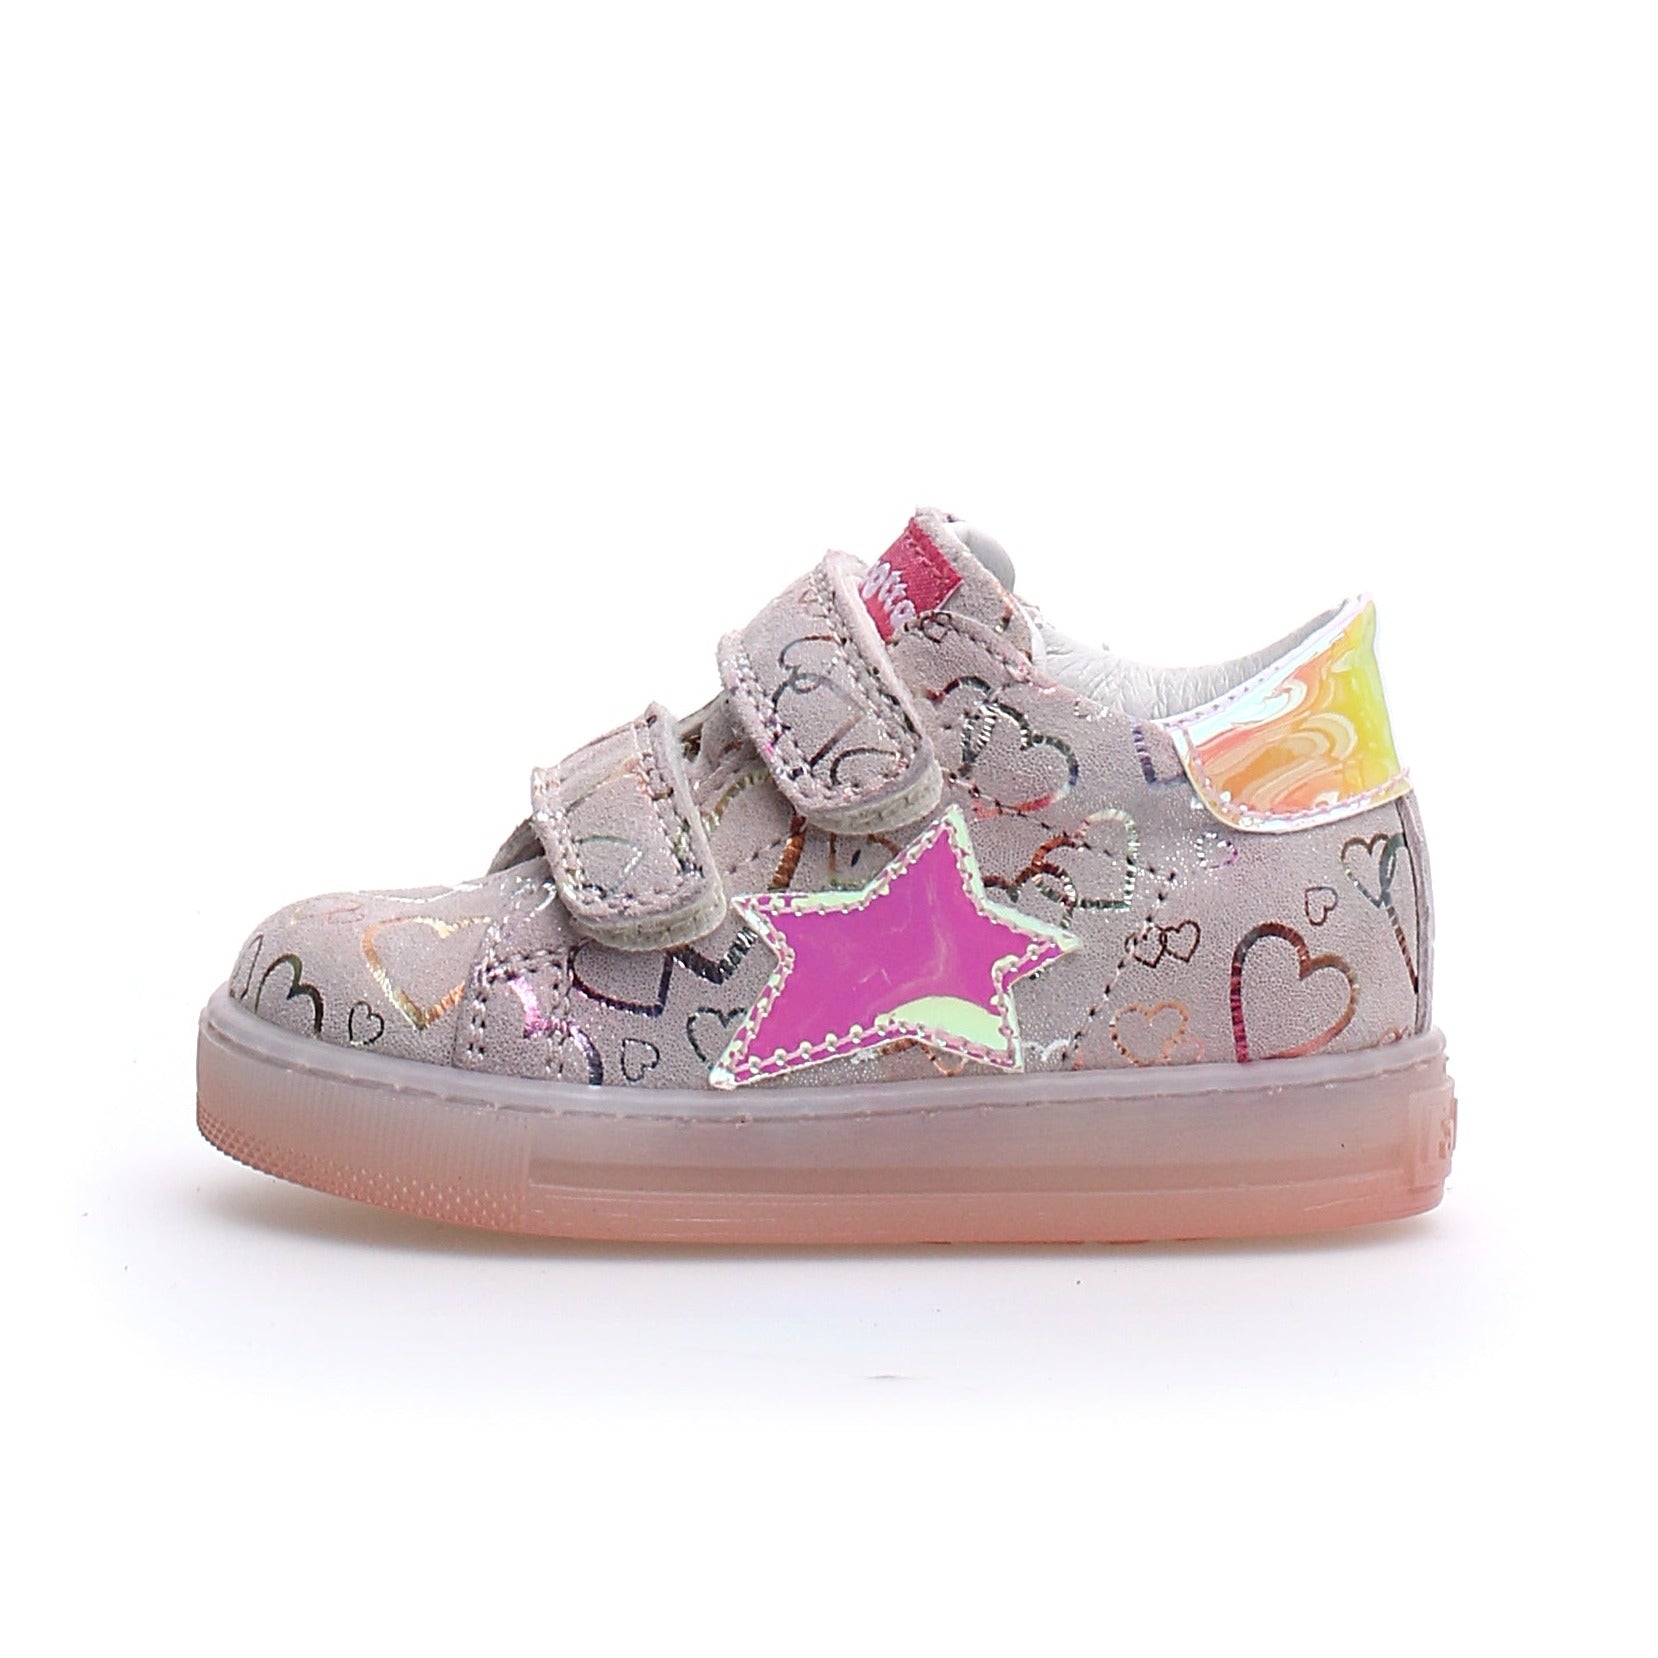 Naturino Girl's Cocoon Vl Big Hearts Print Sneakers - Cipria – Just Shoes  for Kids